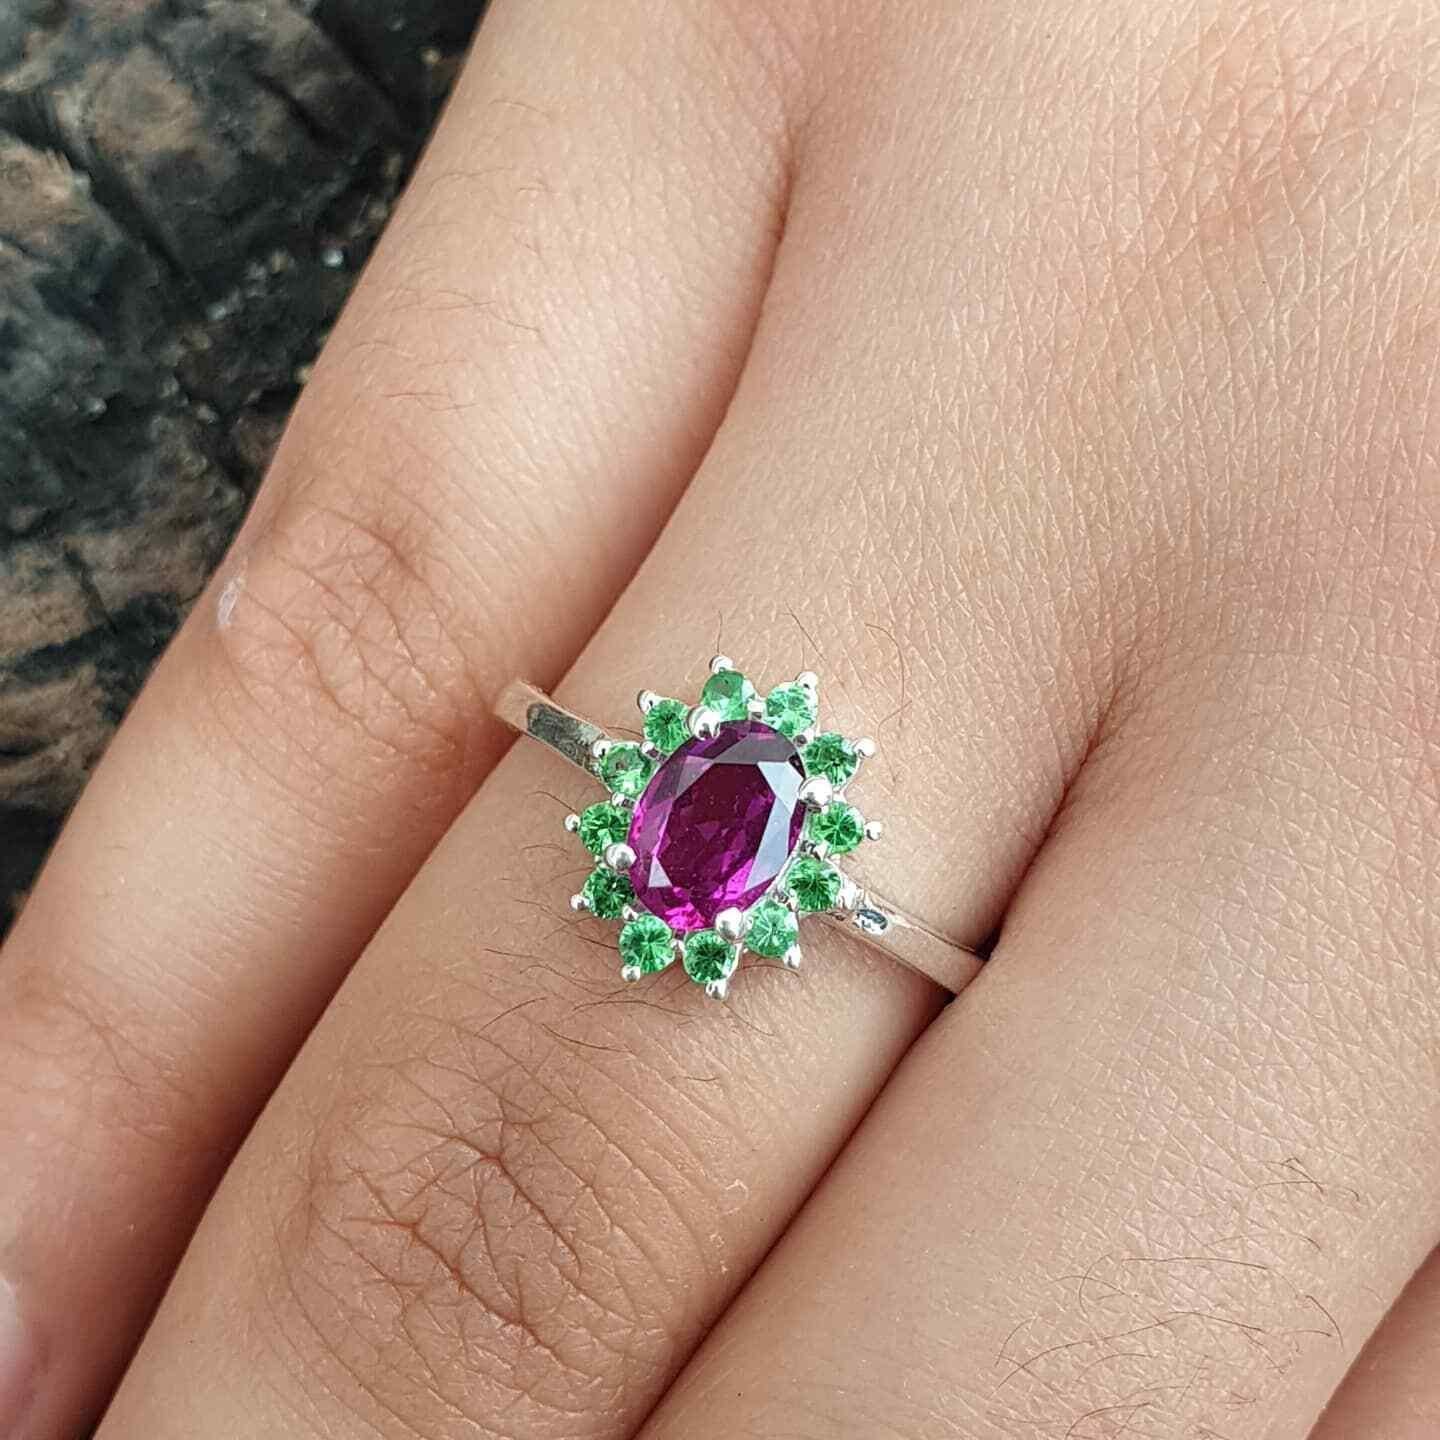 Round Cut Purple Garnet Cluster Ring Sterling Sliver Ring For Birthday/Anniversary Gift. For Sale